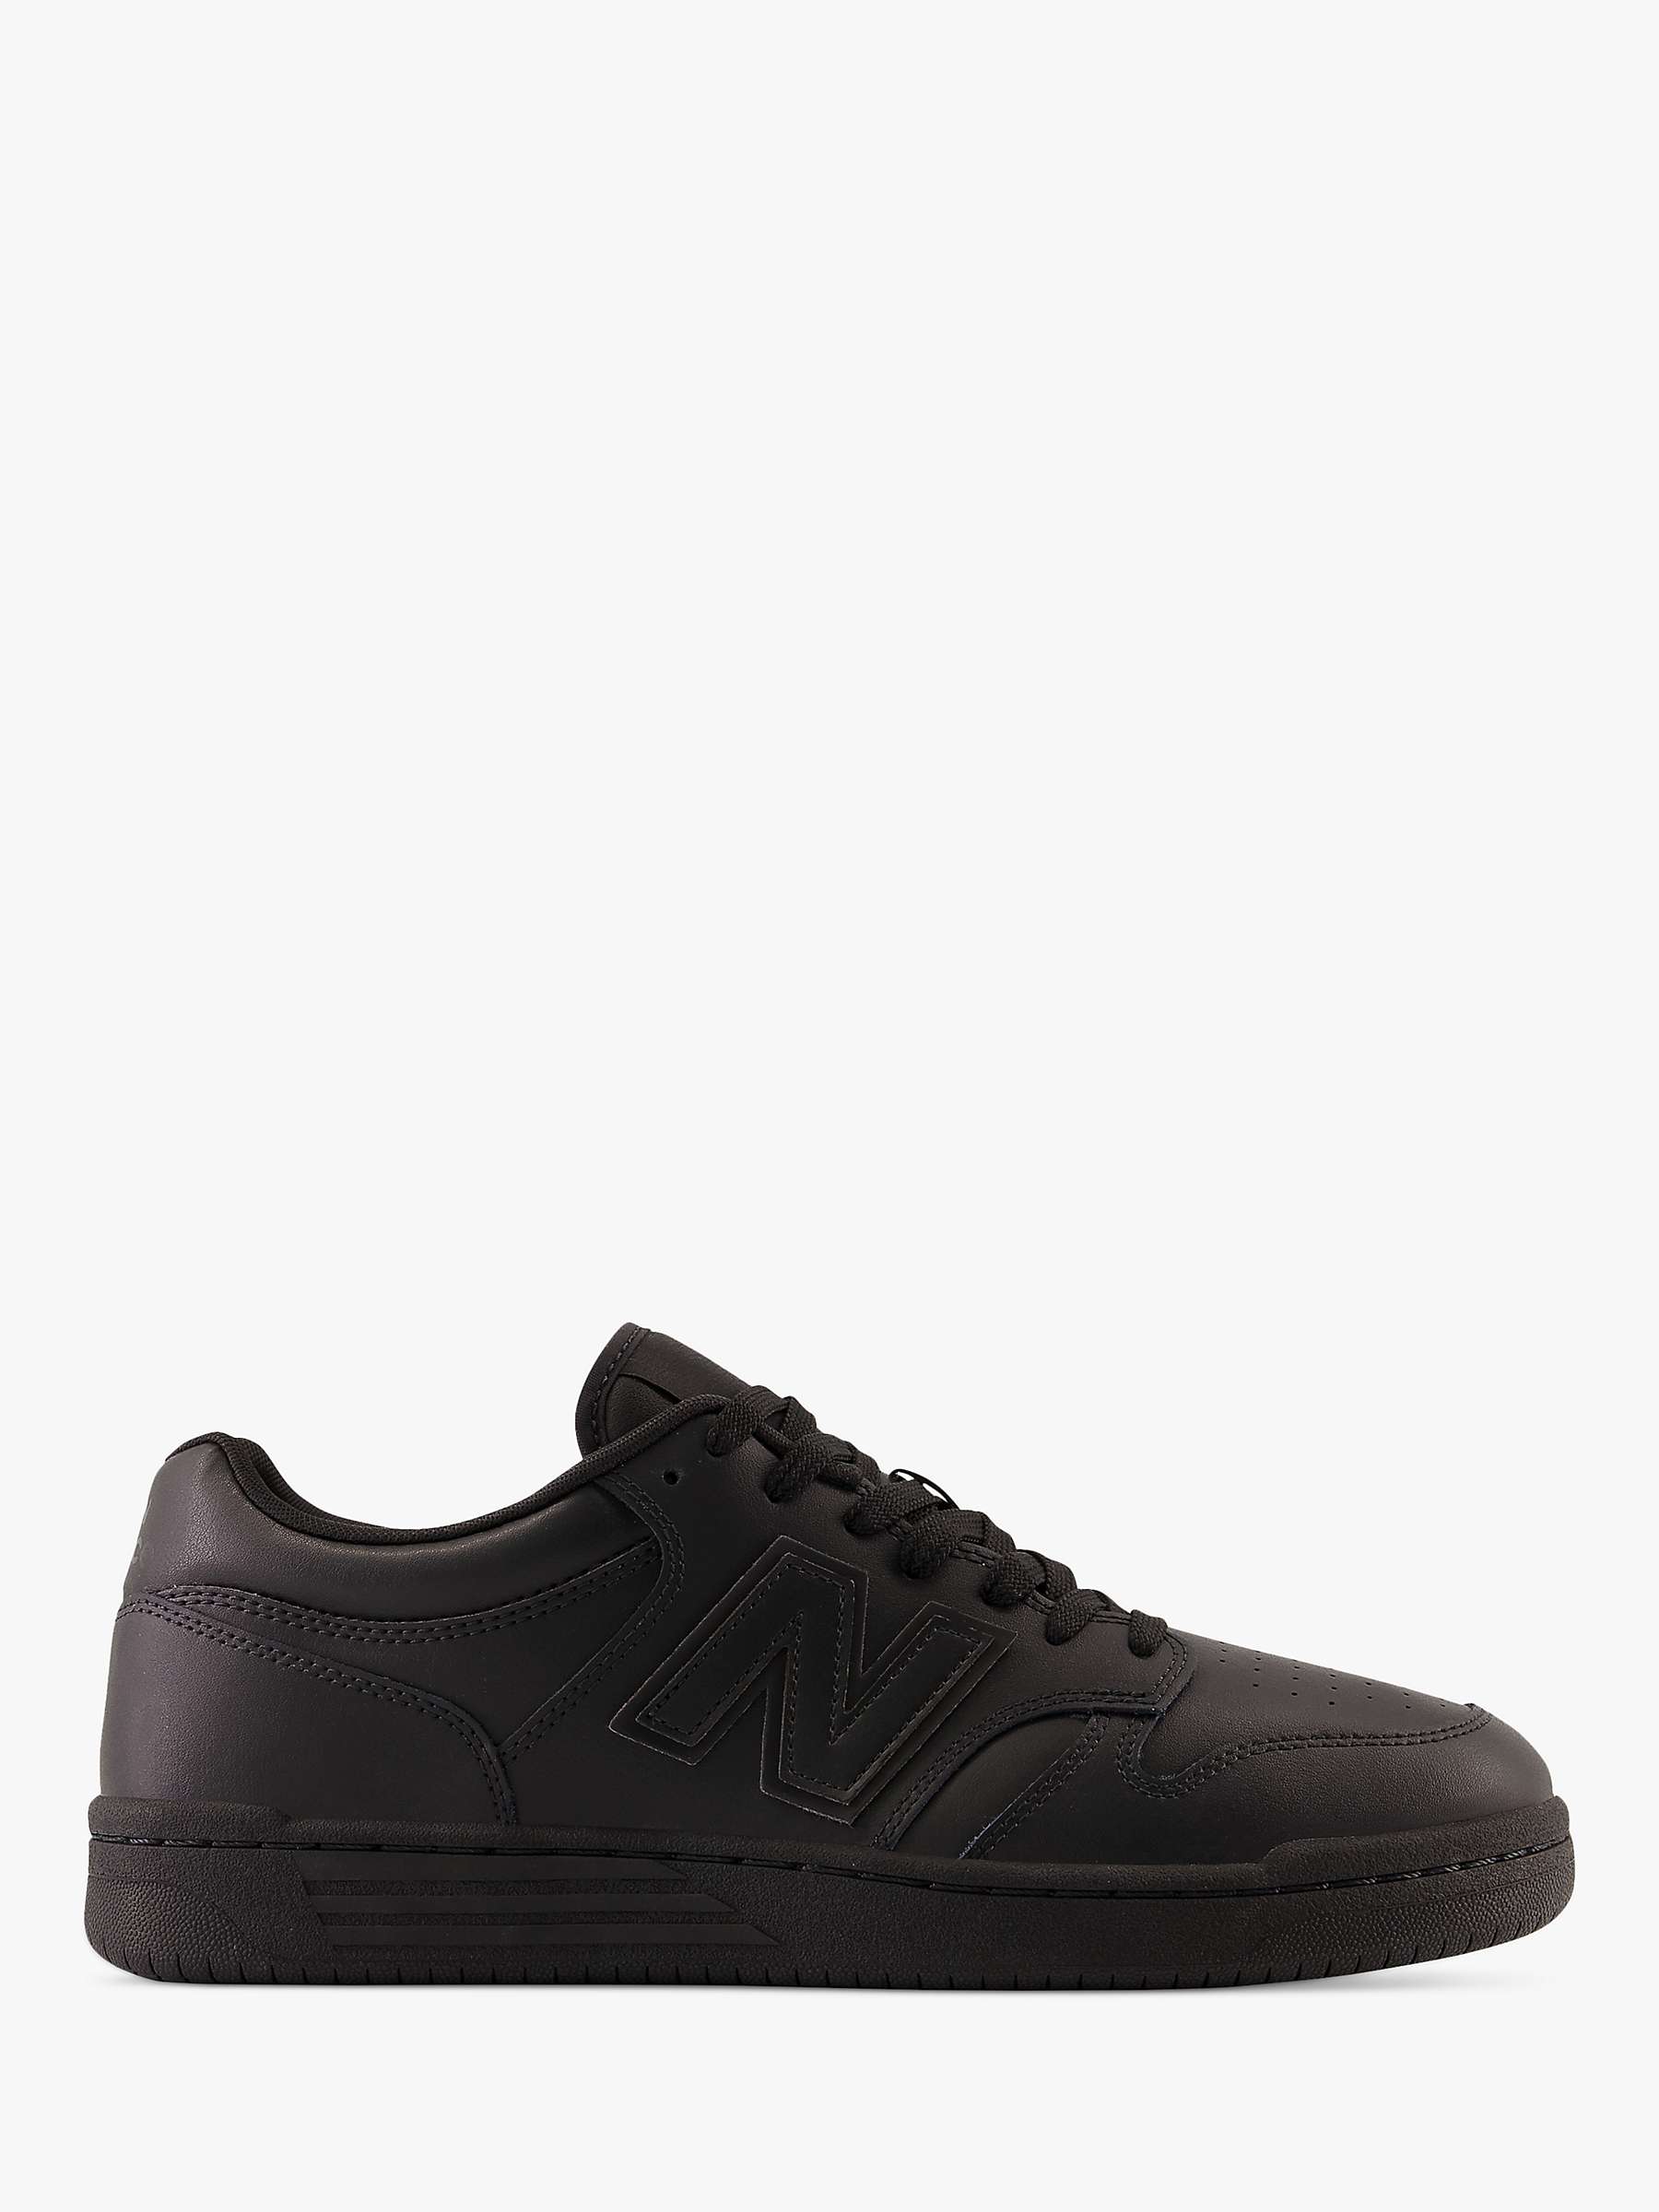 Buy New Balance 480 Leather Lace Up Trainers Online at johnlewis.com